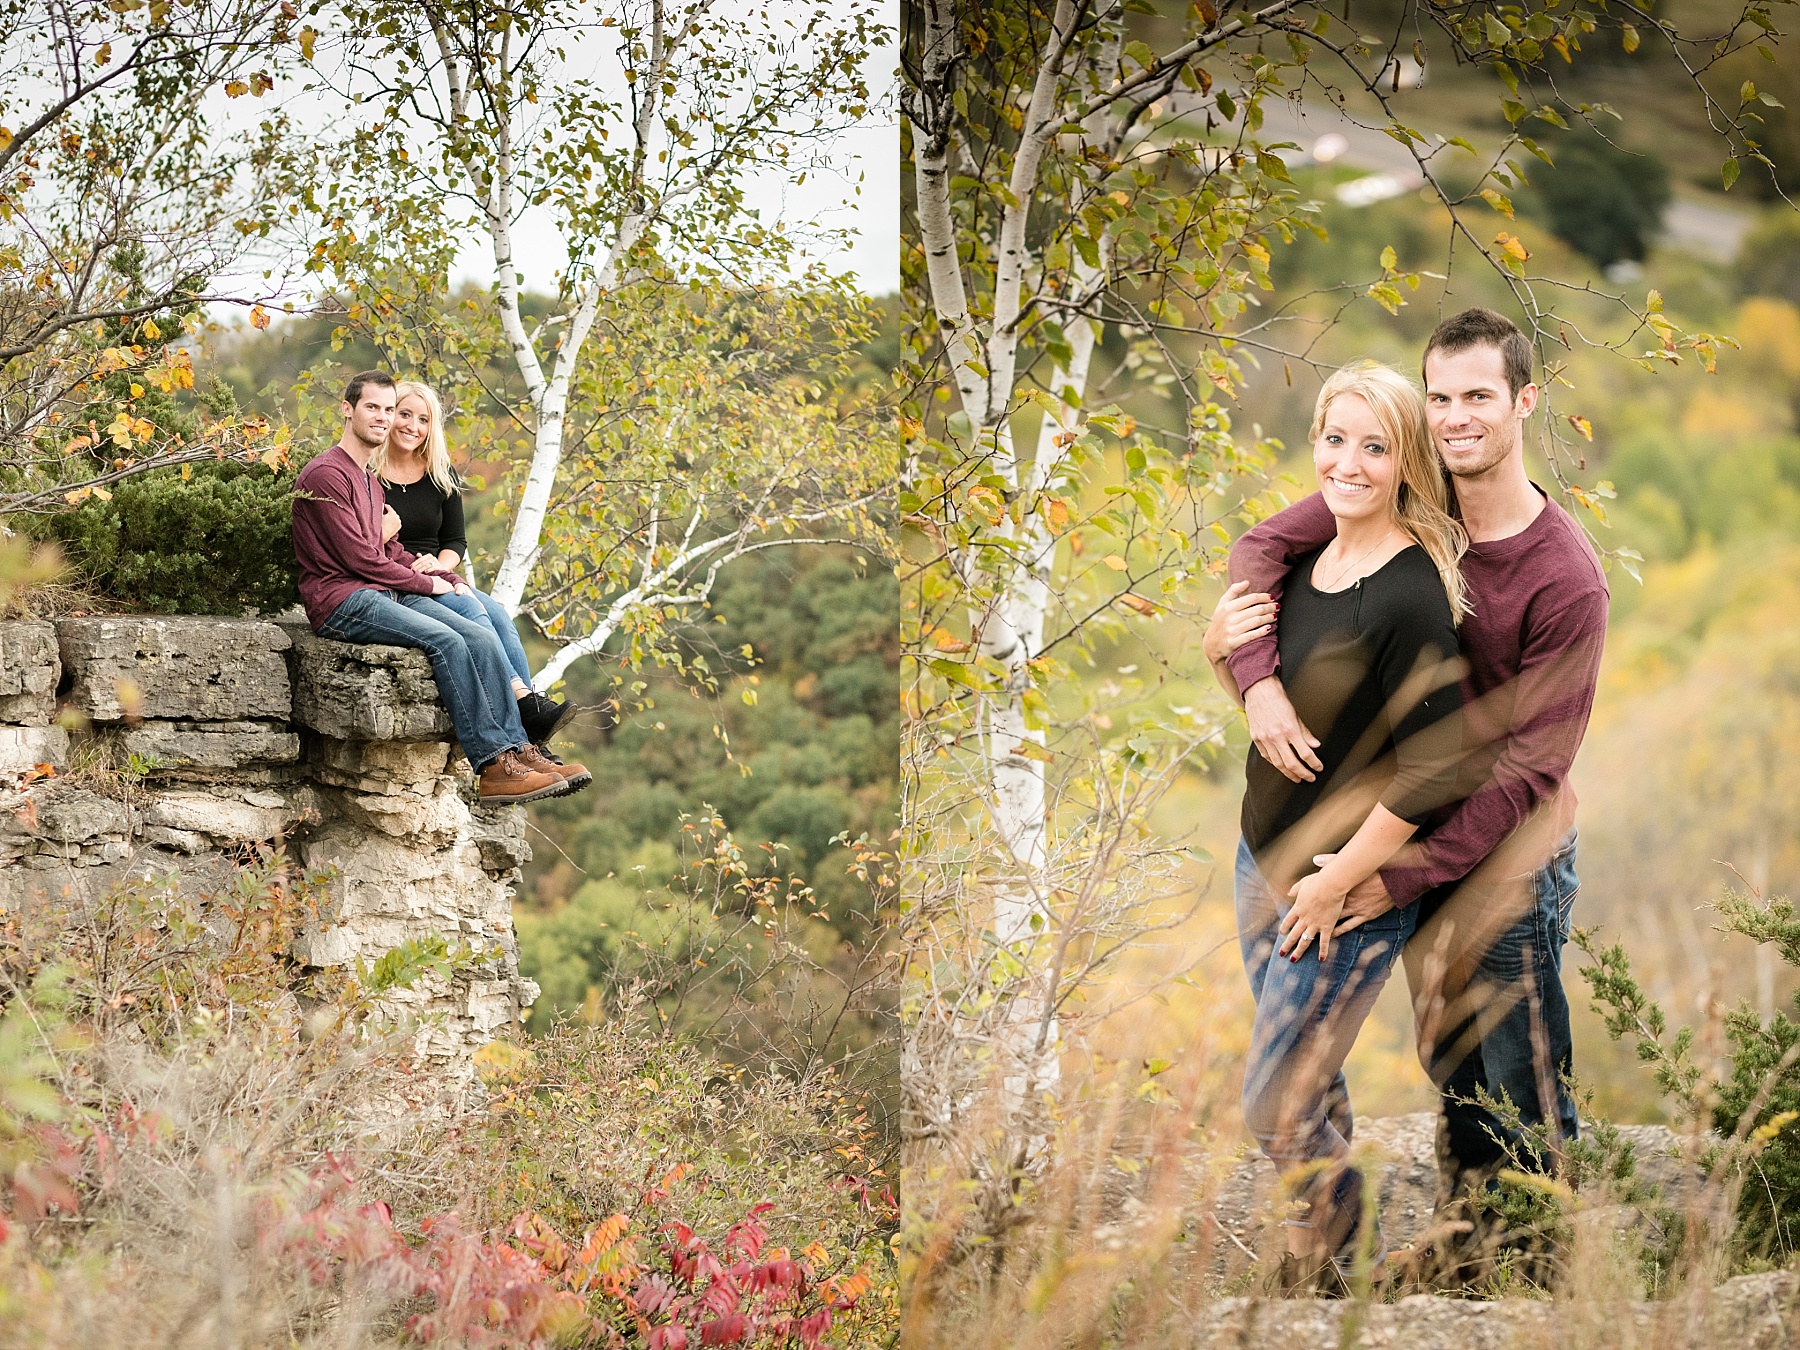 Just as summer turns to fall we explored a hidden spot just outside of town for Nora & Cory's LaCrosse engagement photos on the bluffs.